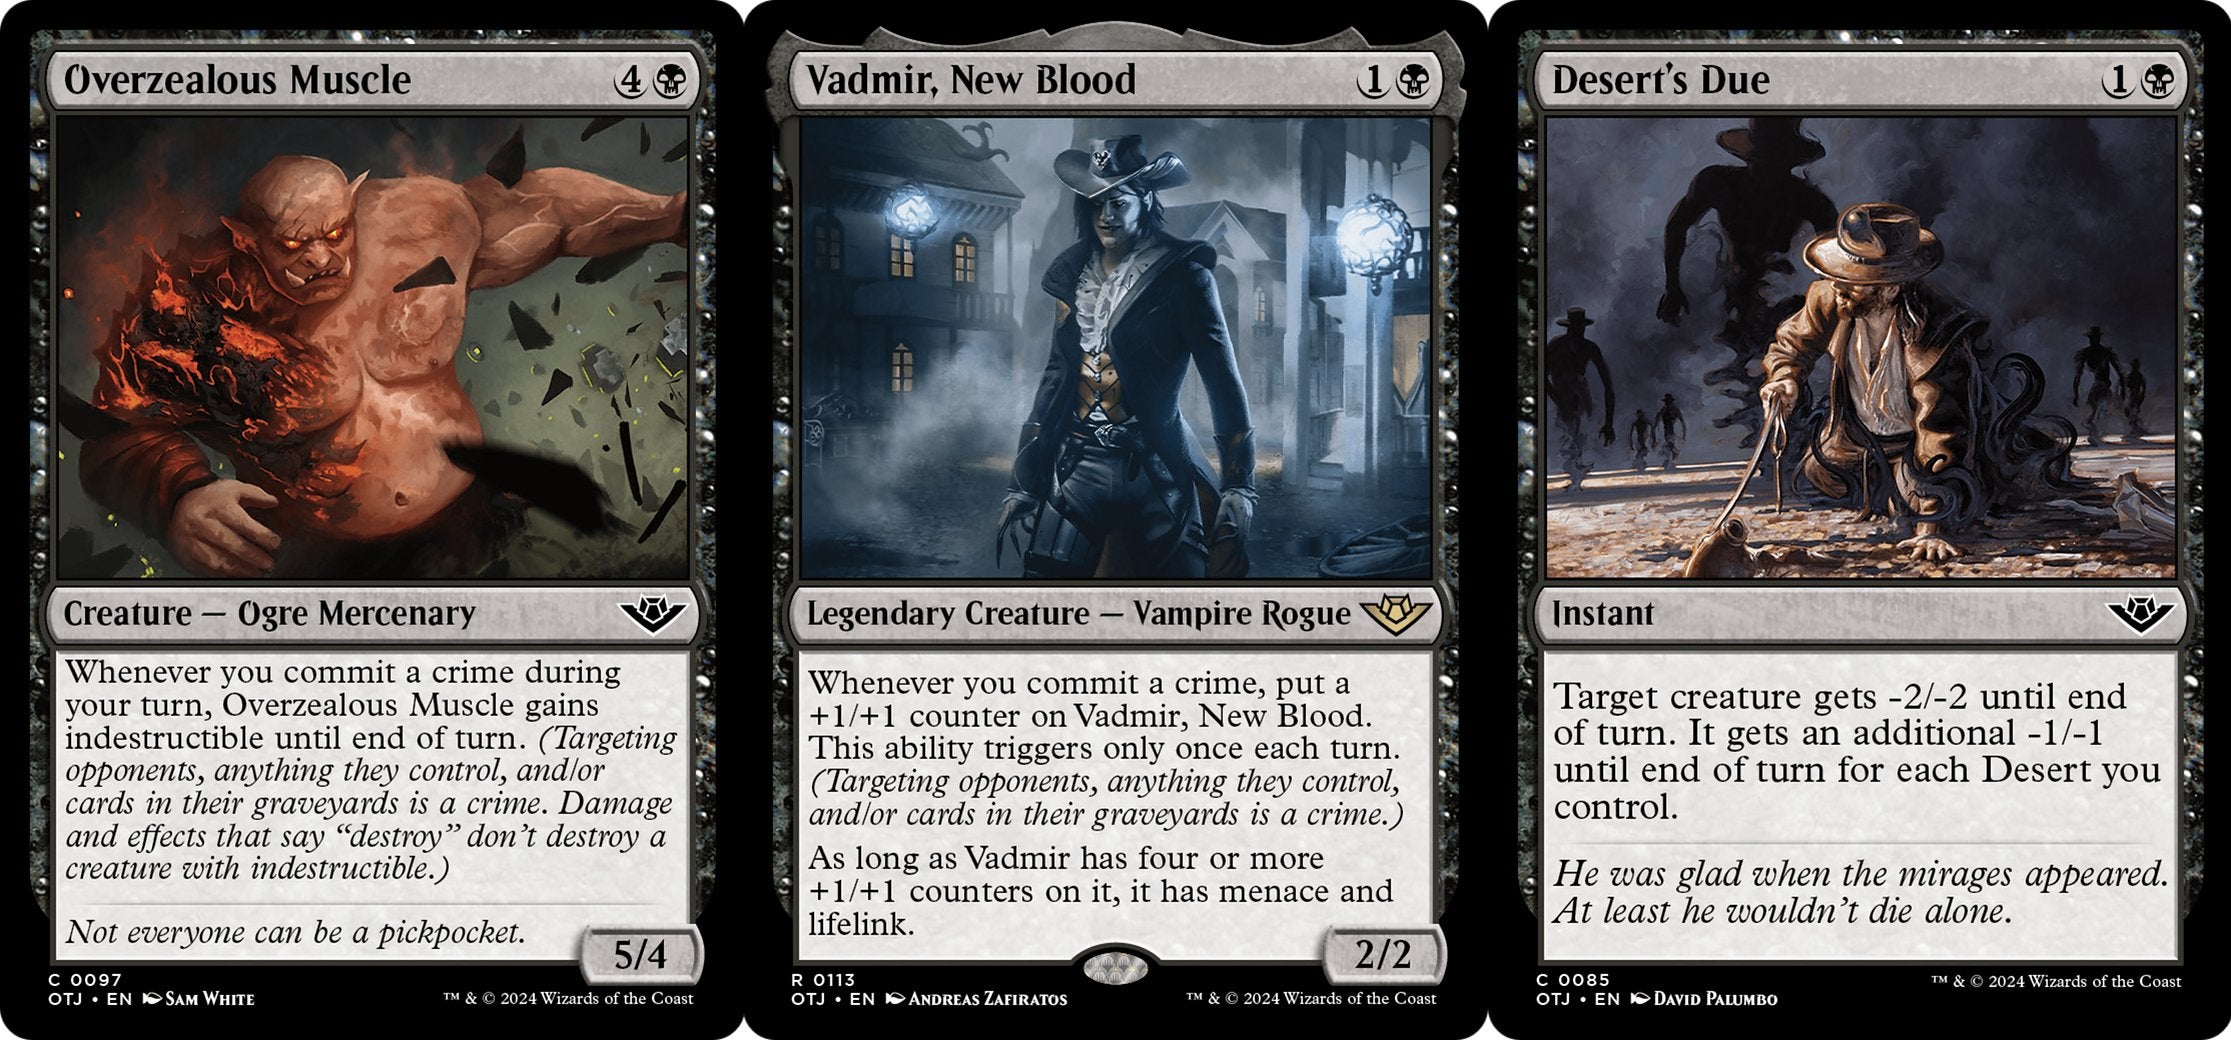 Overzealous Muscle; Vadmir, New Blood; and Desert's Due from MTG.